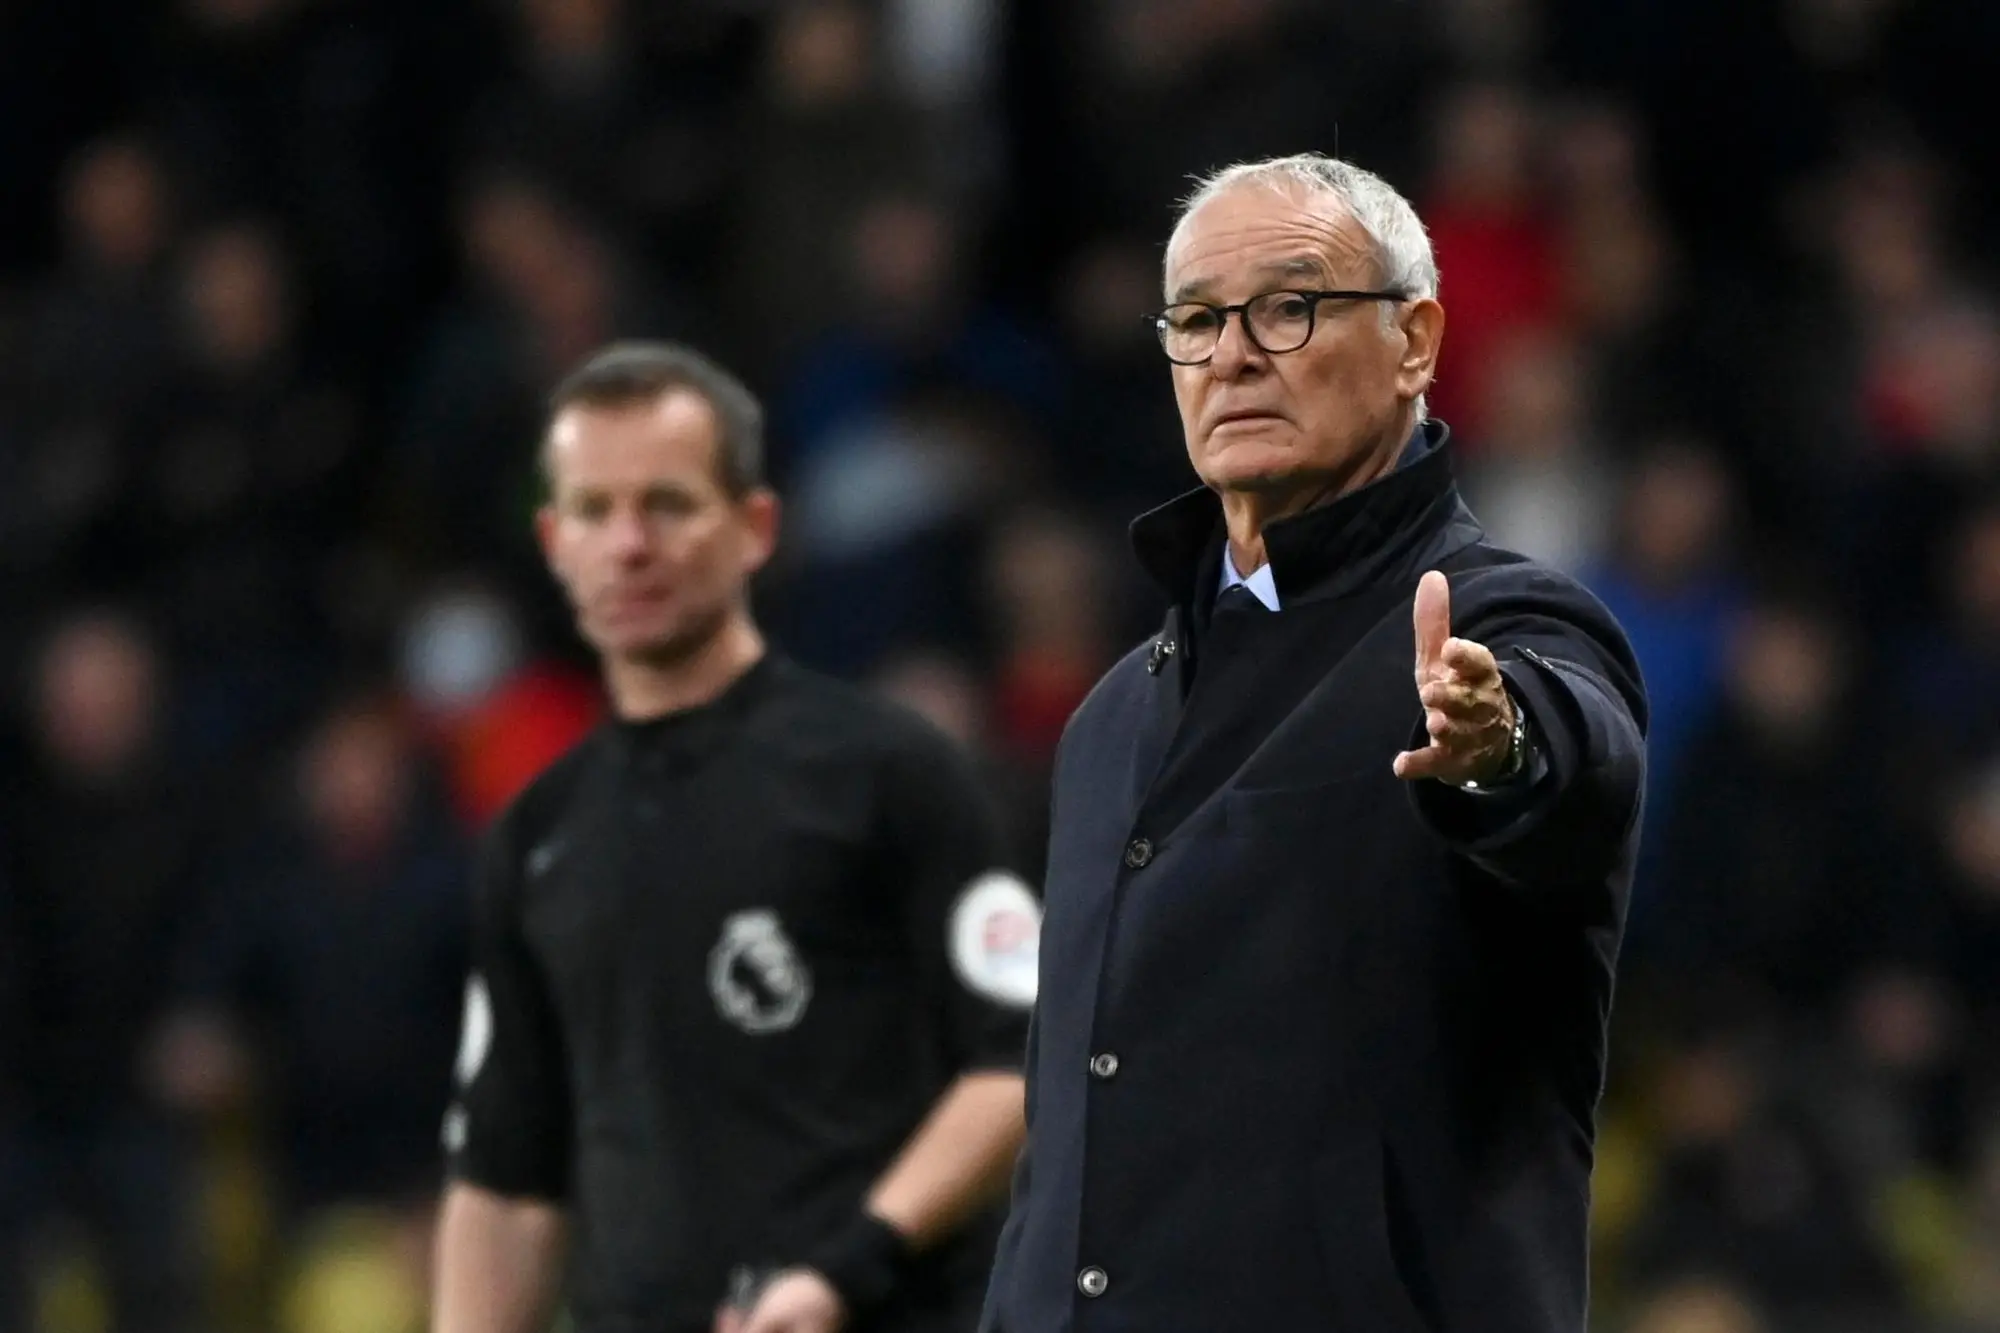 Claudio Ranieri will lead the first training session after New Year's Eve (Archive)